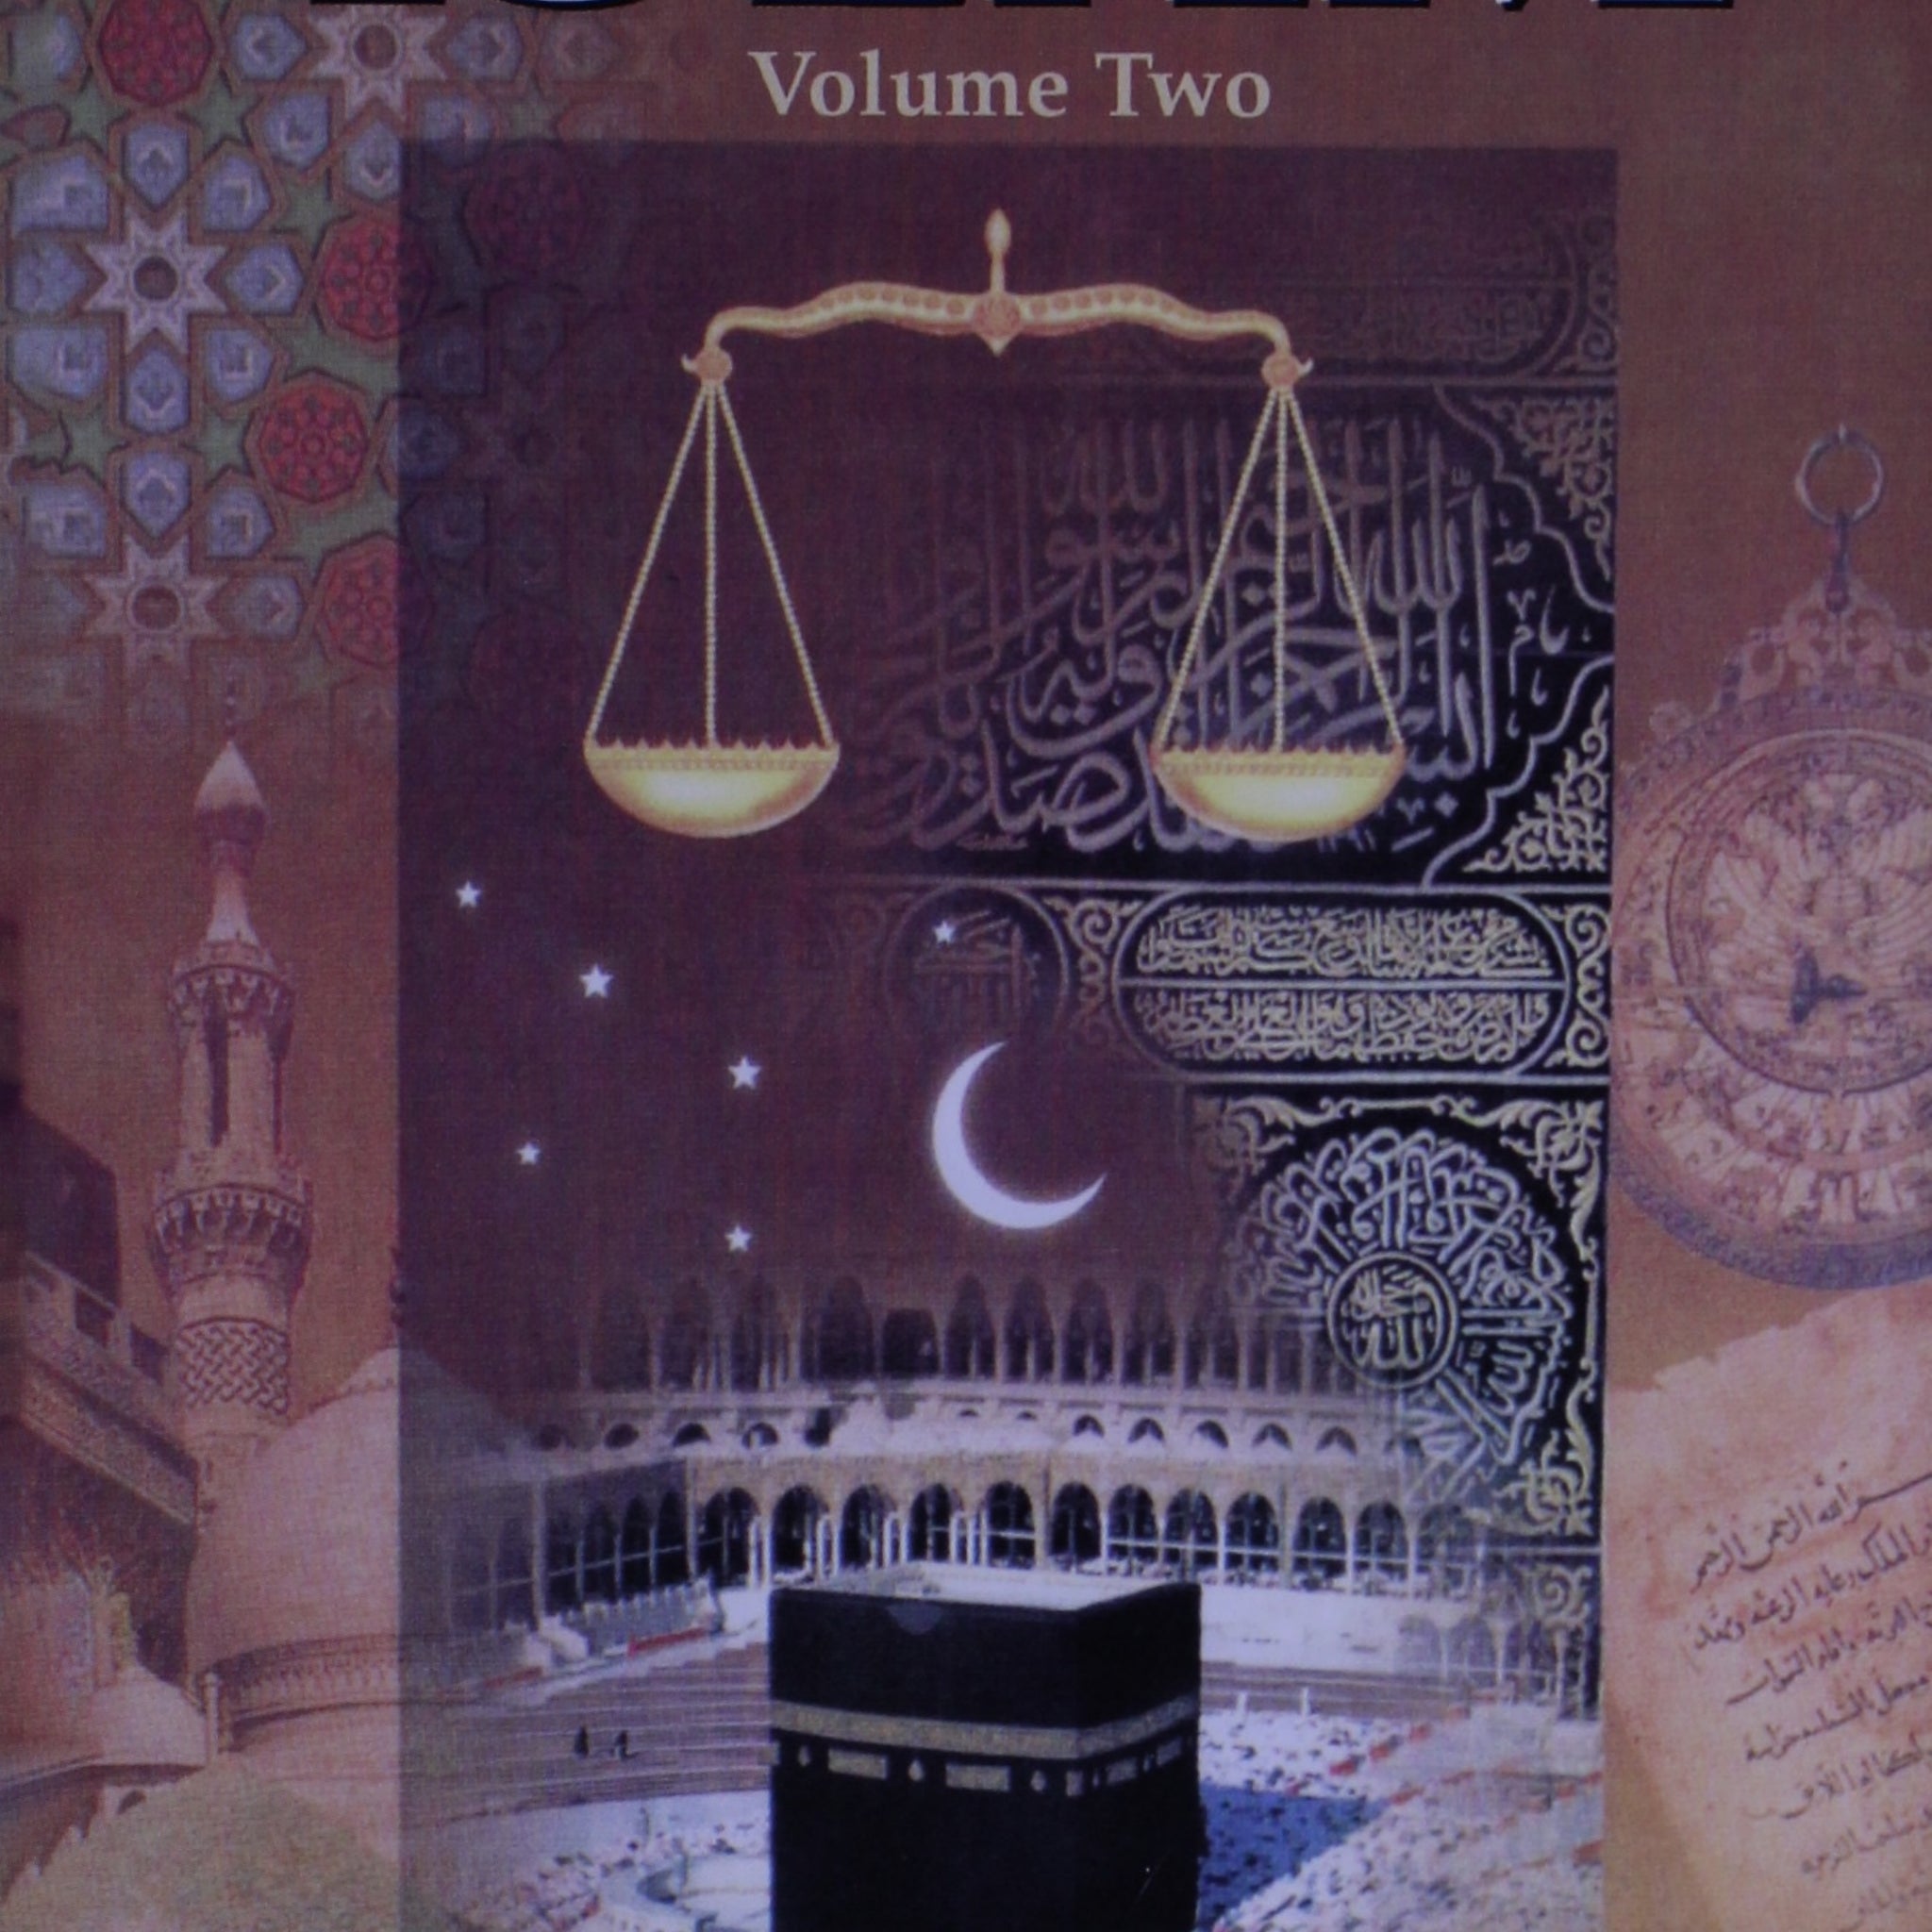 The History Of Islam ( Vol.2 )